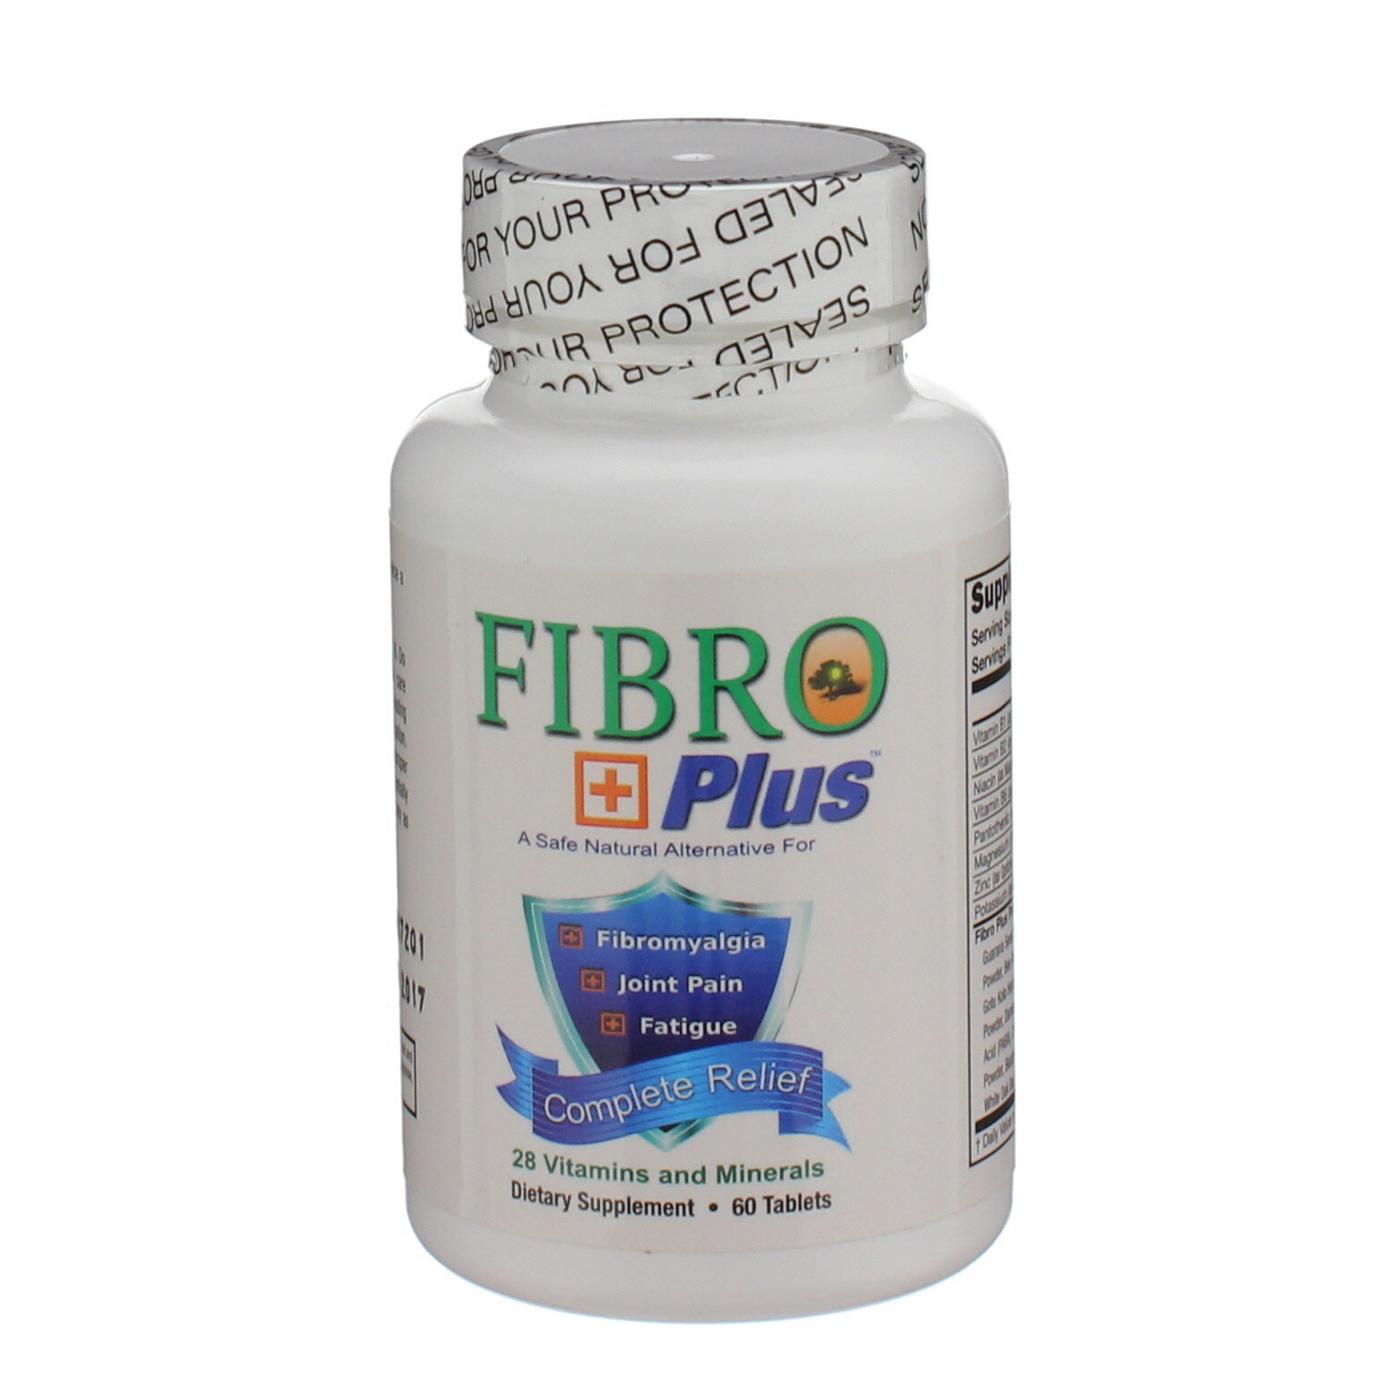 Fibro Plus Complete Relief for Fibromyalgia, Joint Pain & Fatigue; image 1 of 2